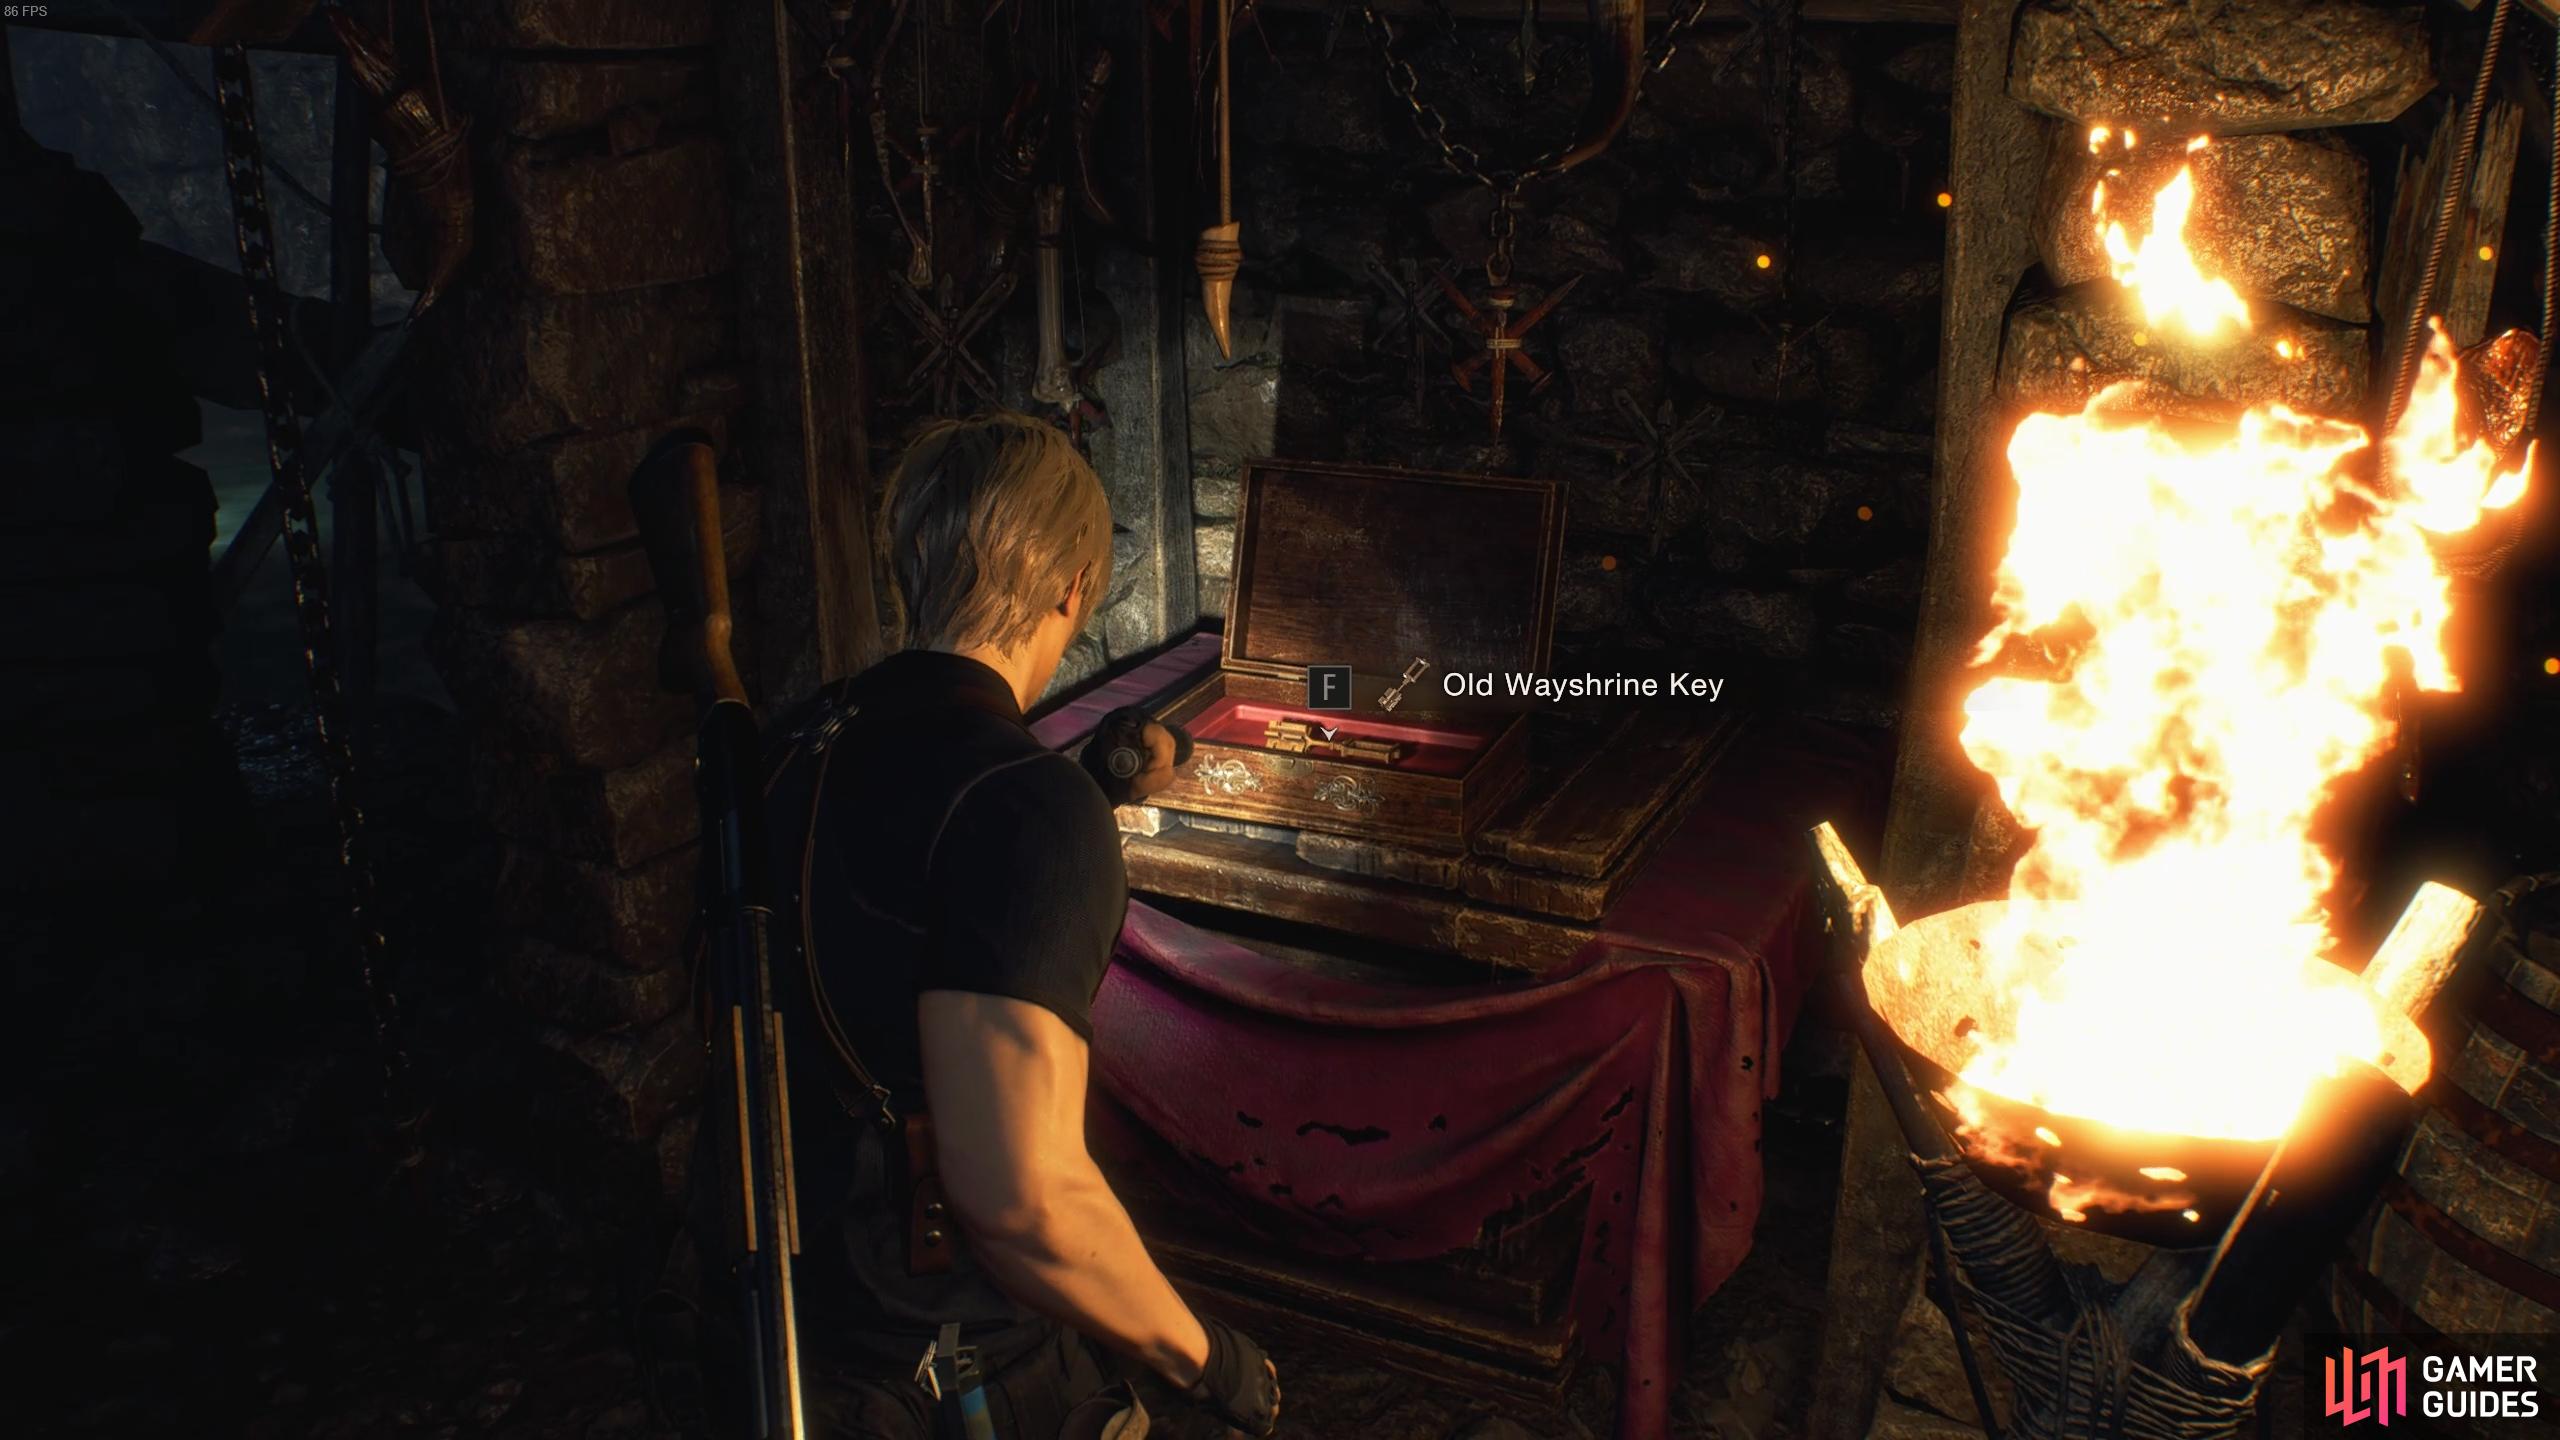 Resident Evil 4 remake: Where to find the Old Wayshrine Key